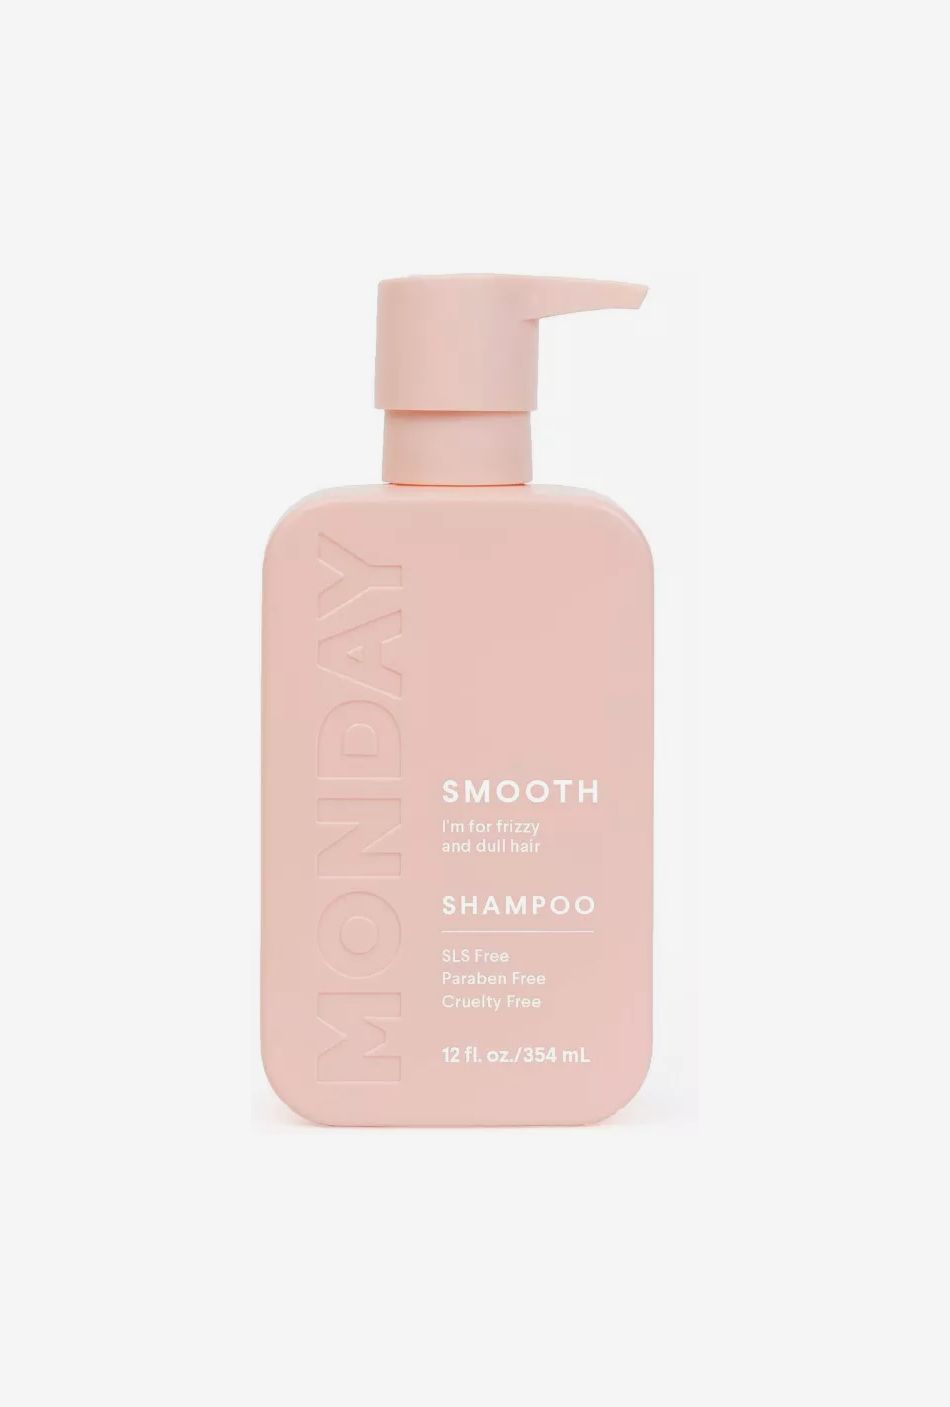 19 Best Sulfate-Free Shampoos 2020 | The Strategist